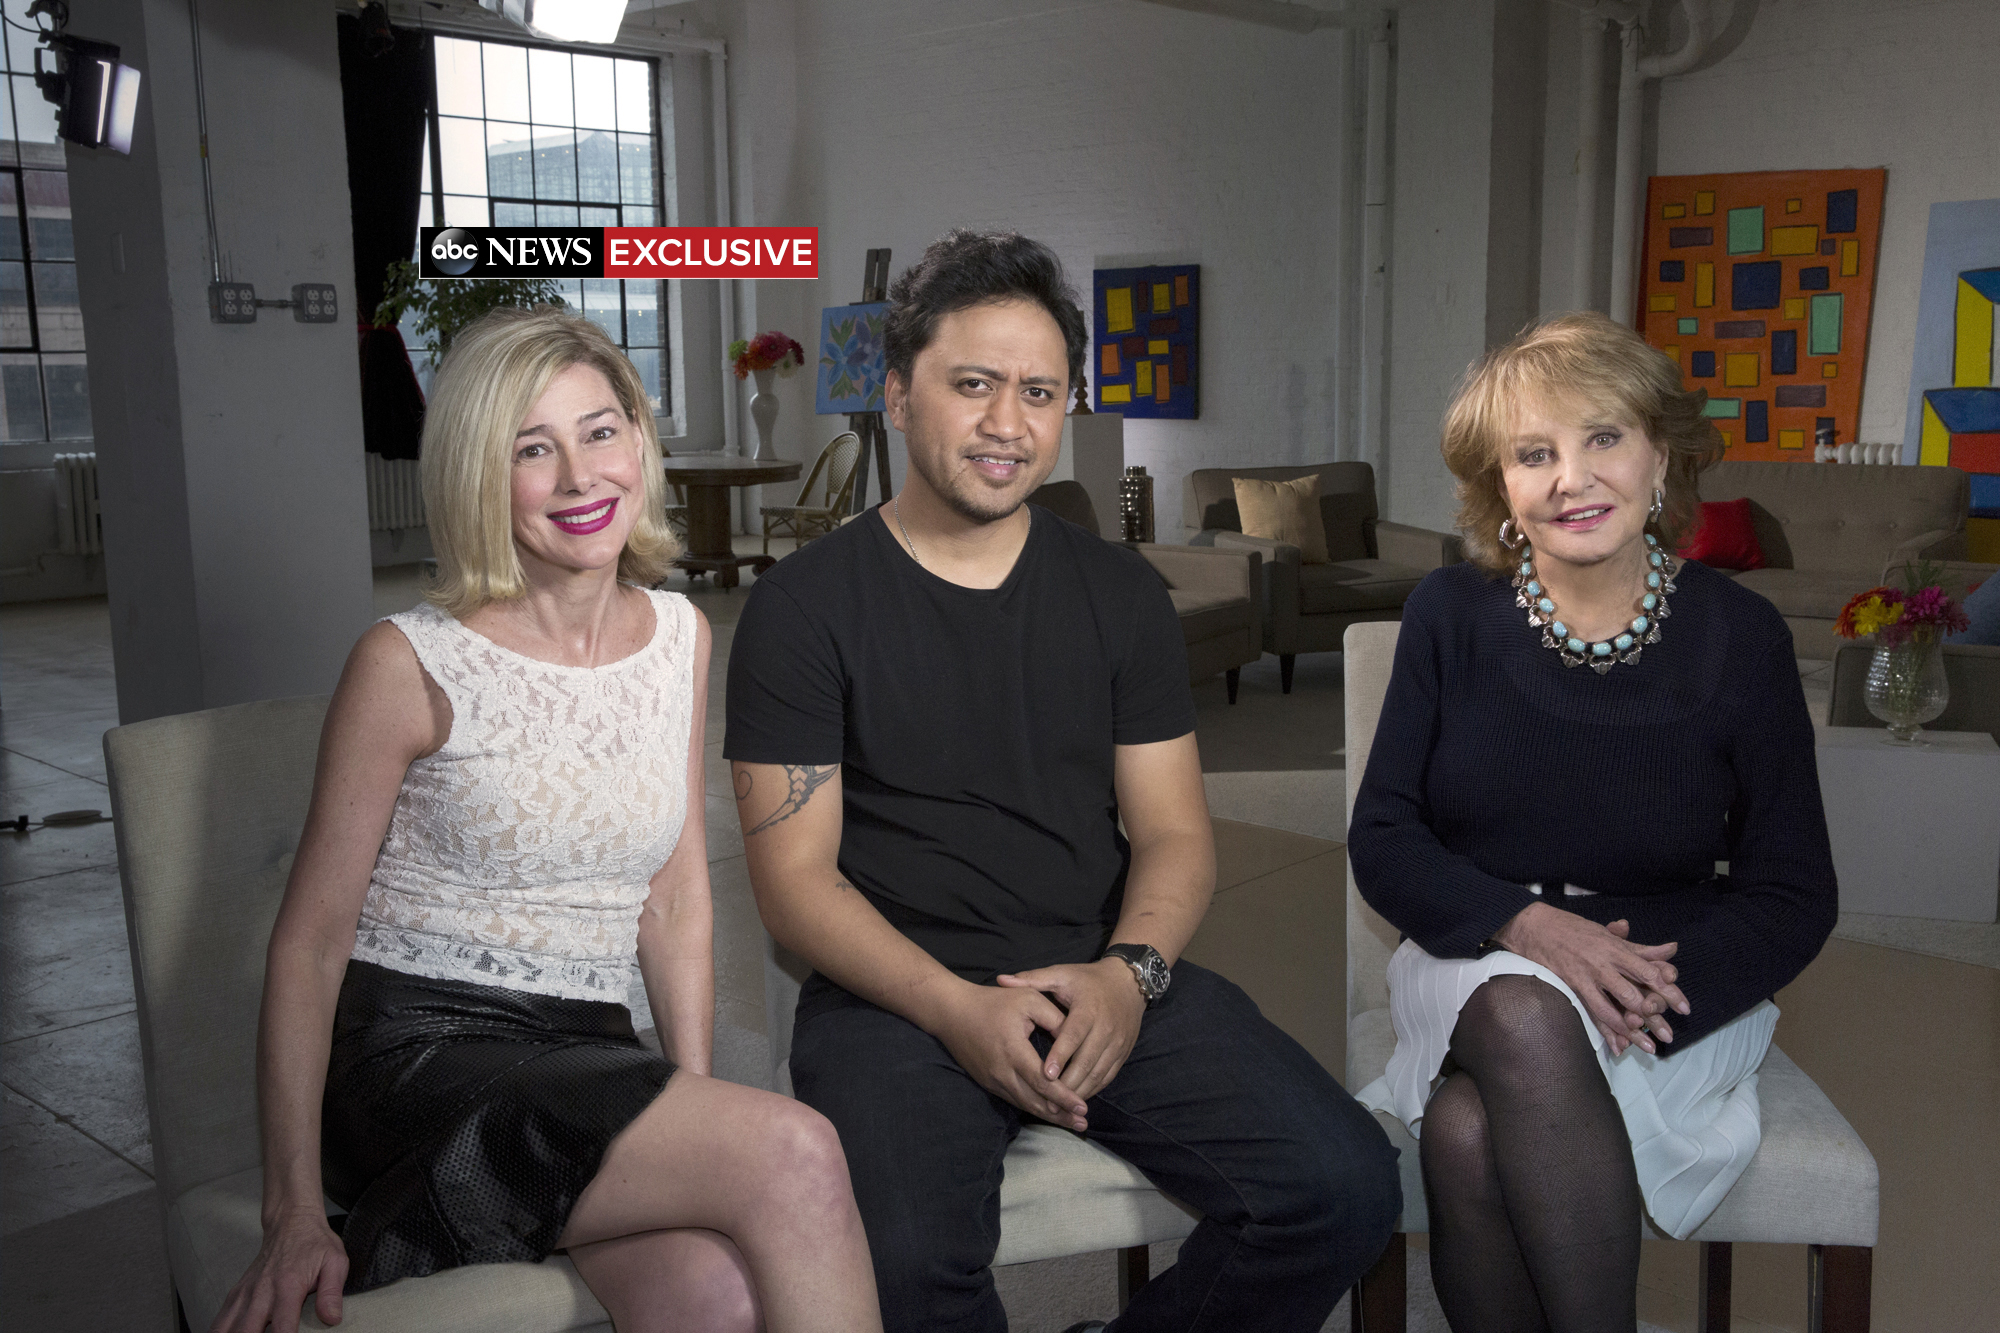 PHOTO: In an exclusive interview with Barbara Walters, Mary Kay Letourneau Fualaau and Vili Fualaau sit down together on the eve of their 10th wedding anniversary.